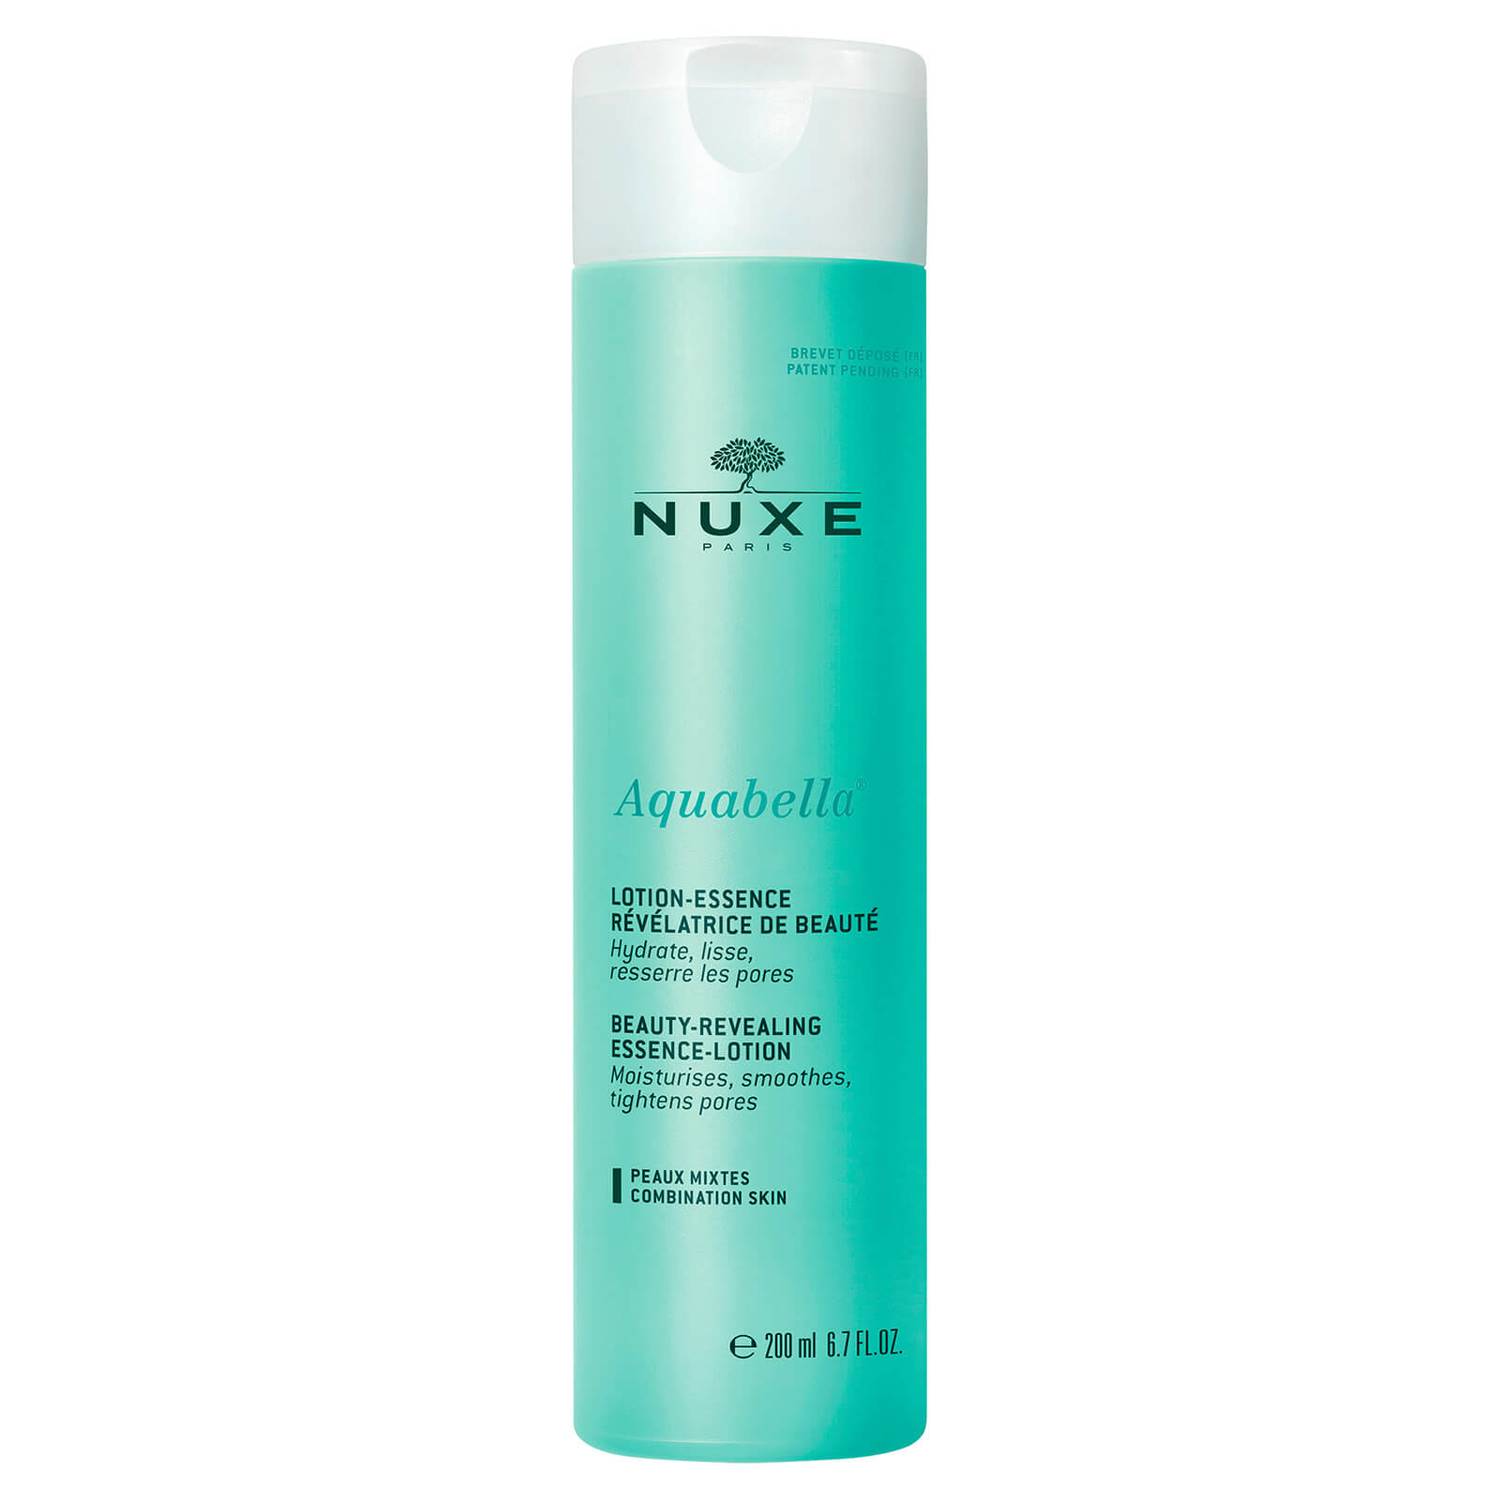 Nuxe Beauty-Revealing Essence-Lotion, Aquabella has a light texture that offers long-lasting hydration.